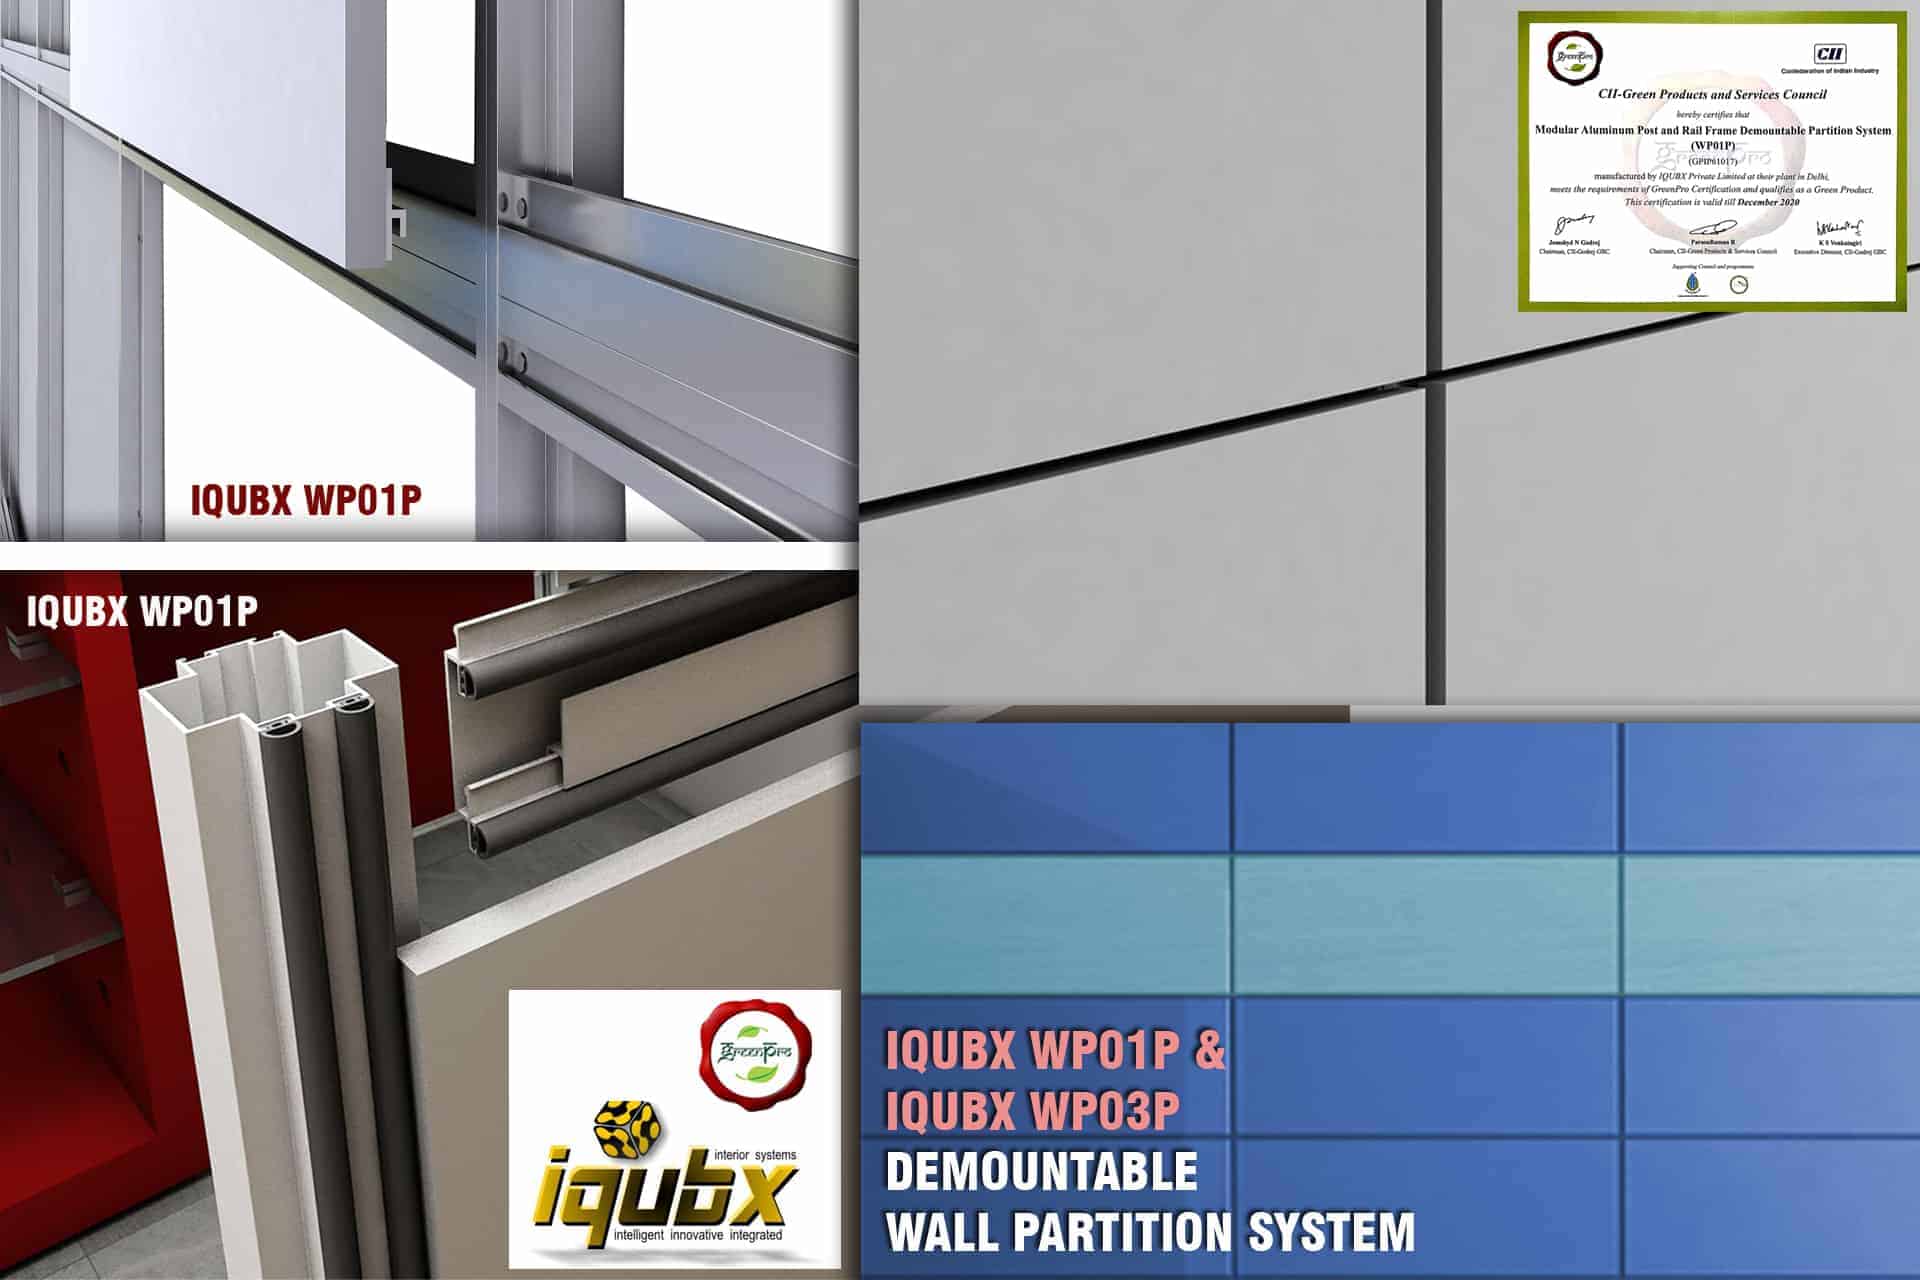 IQUBX WP01P & WP03P demountable wall partition systems